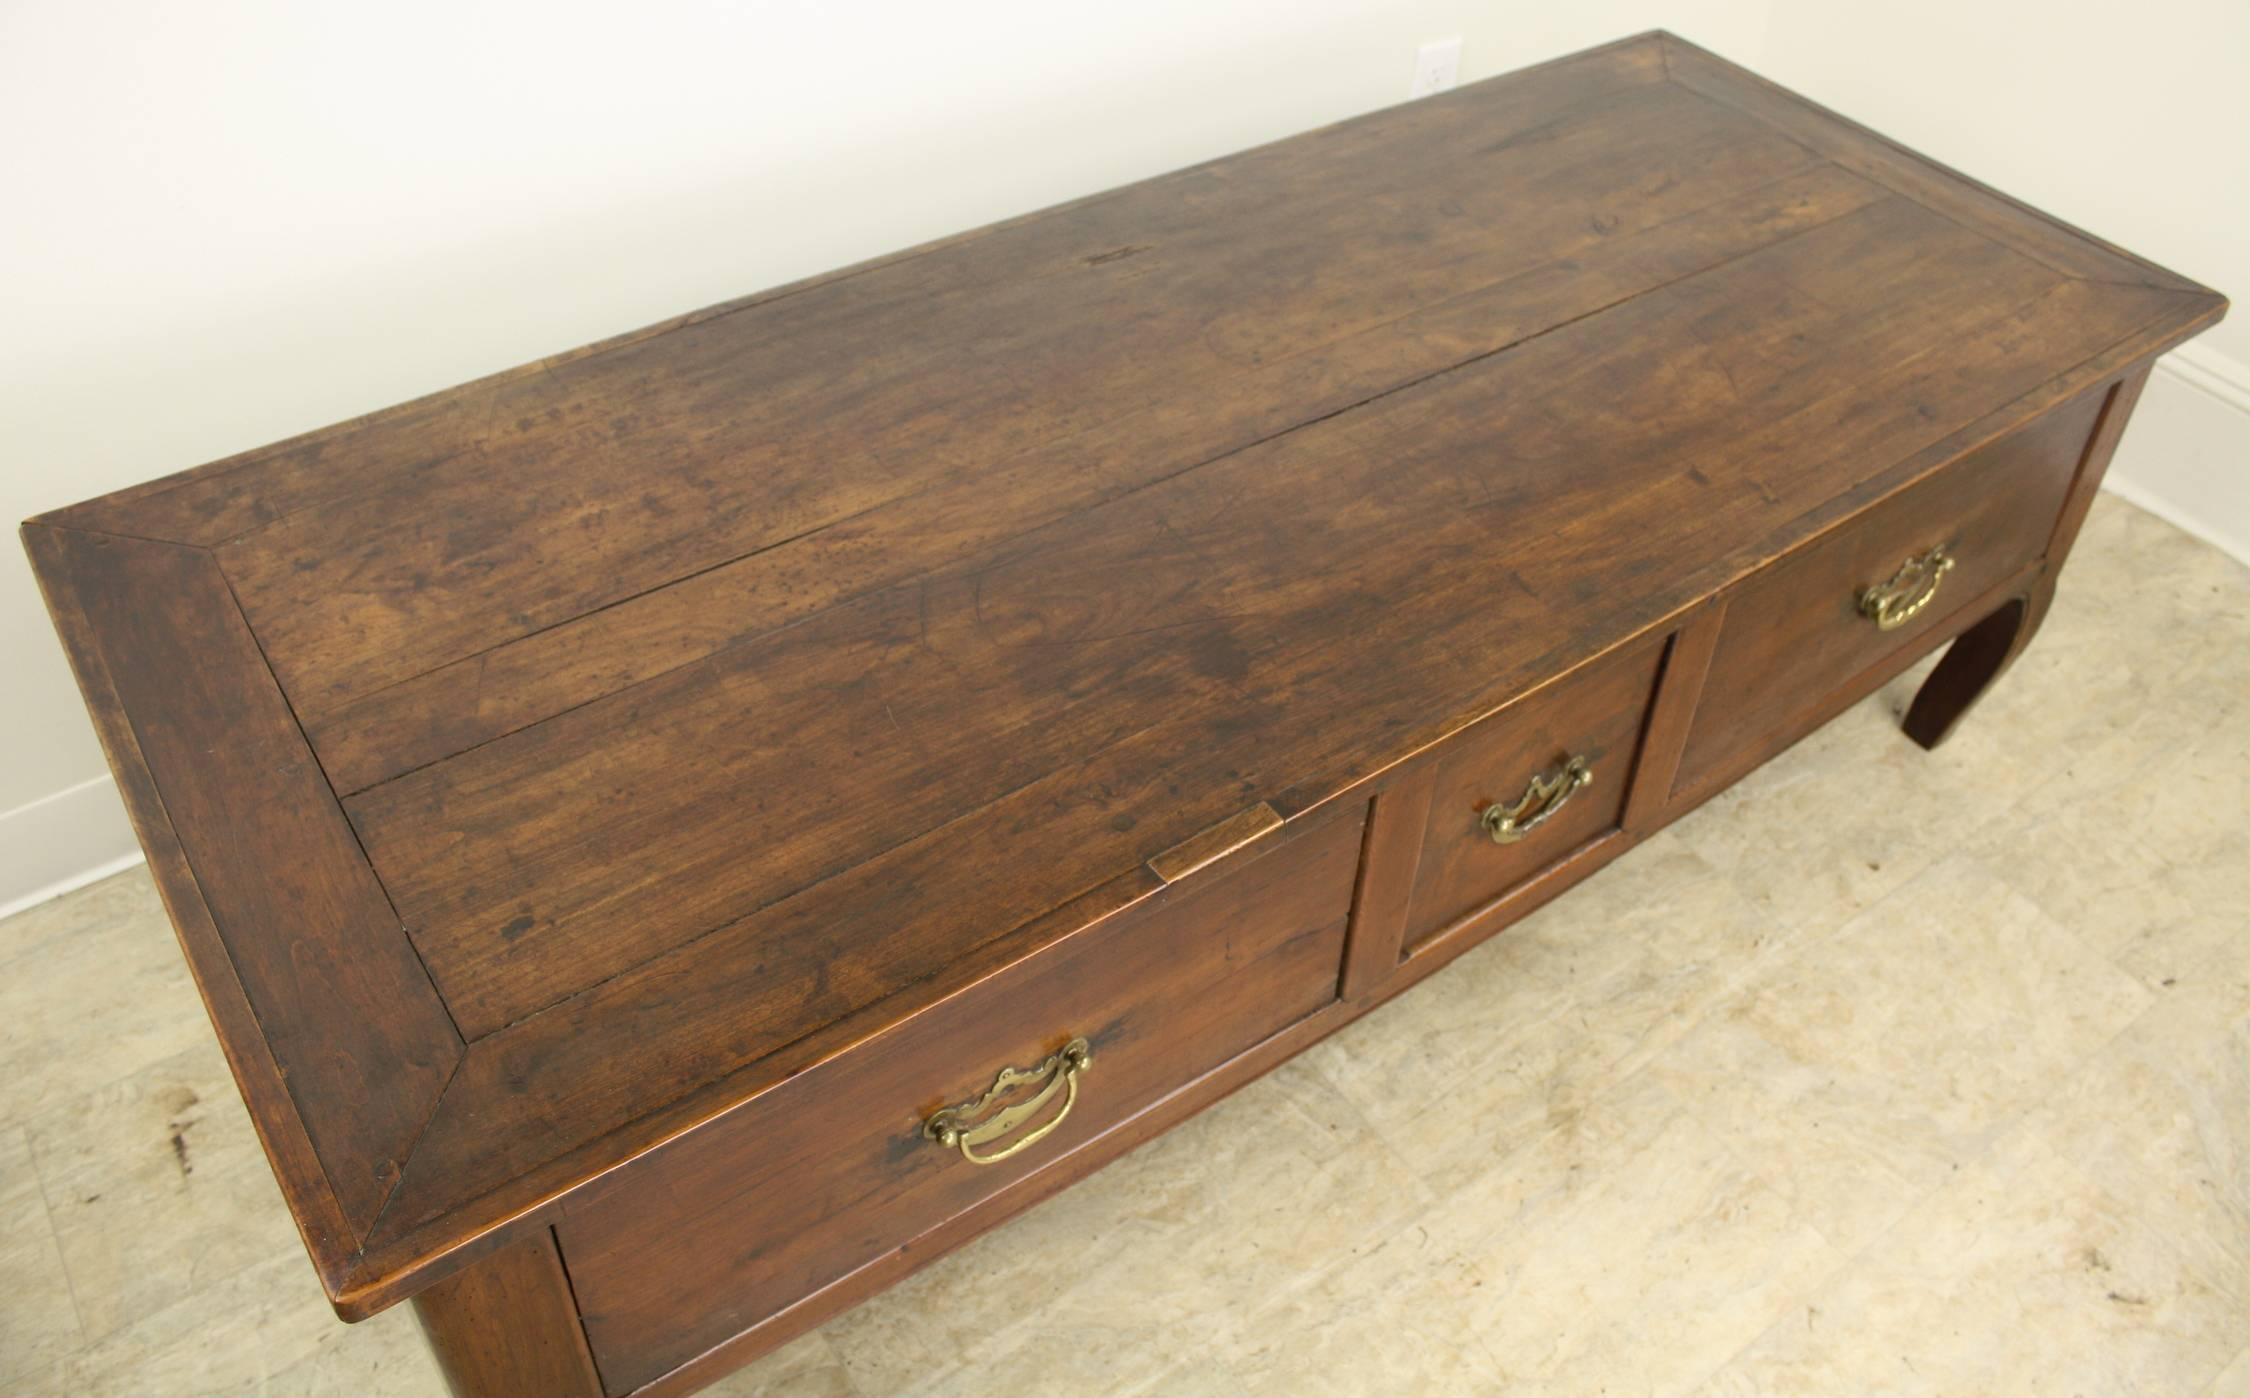 19th Century Antique Cherry Coffee Table with Cabriole Legs